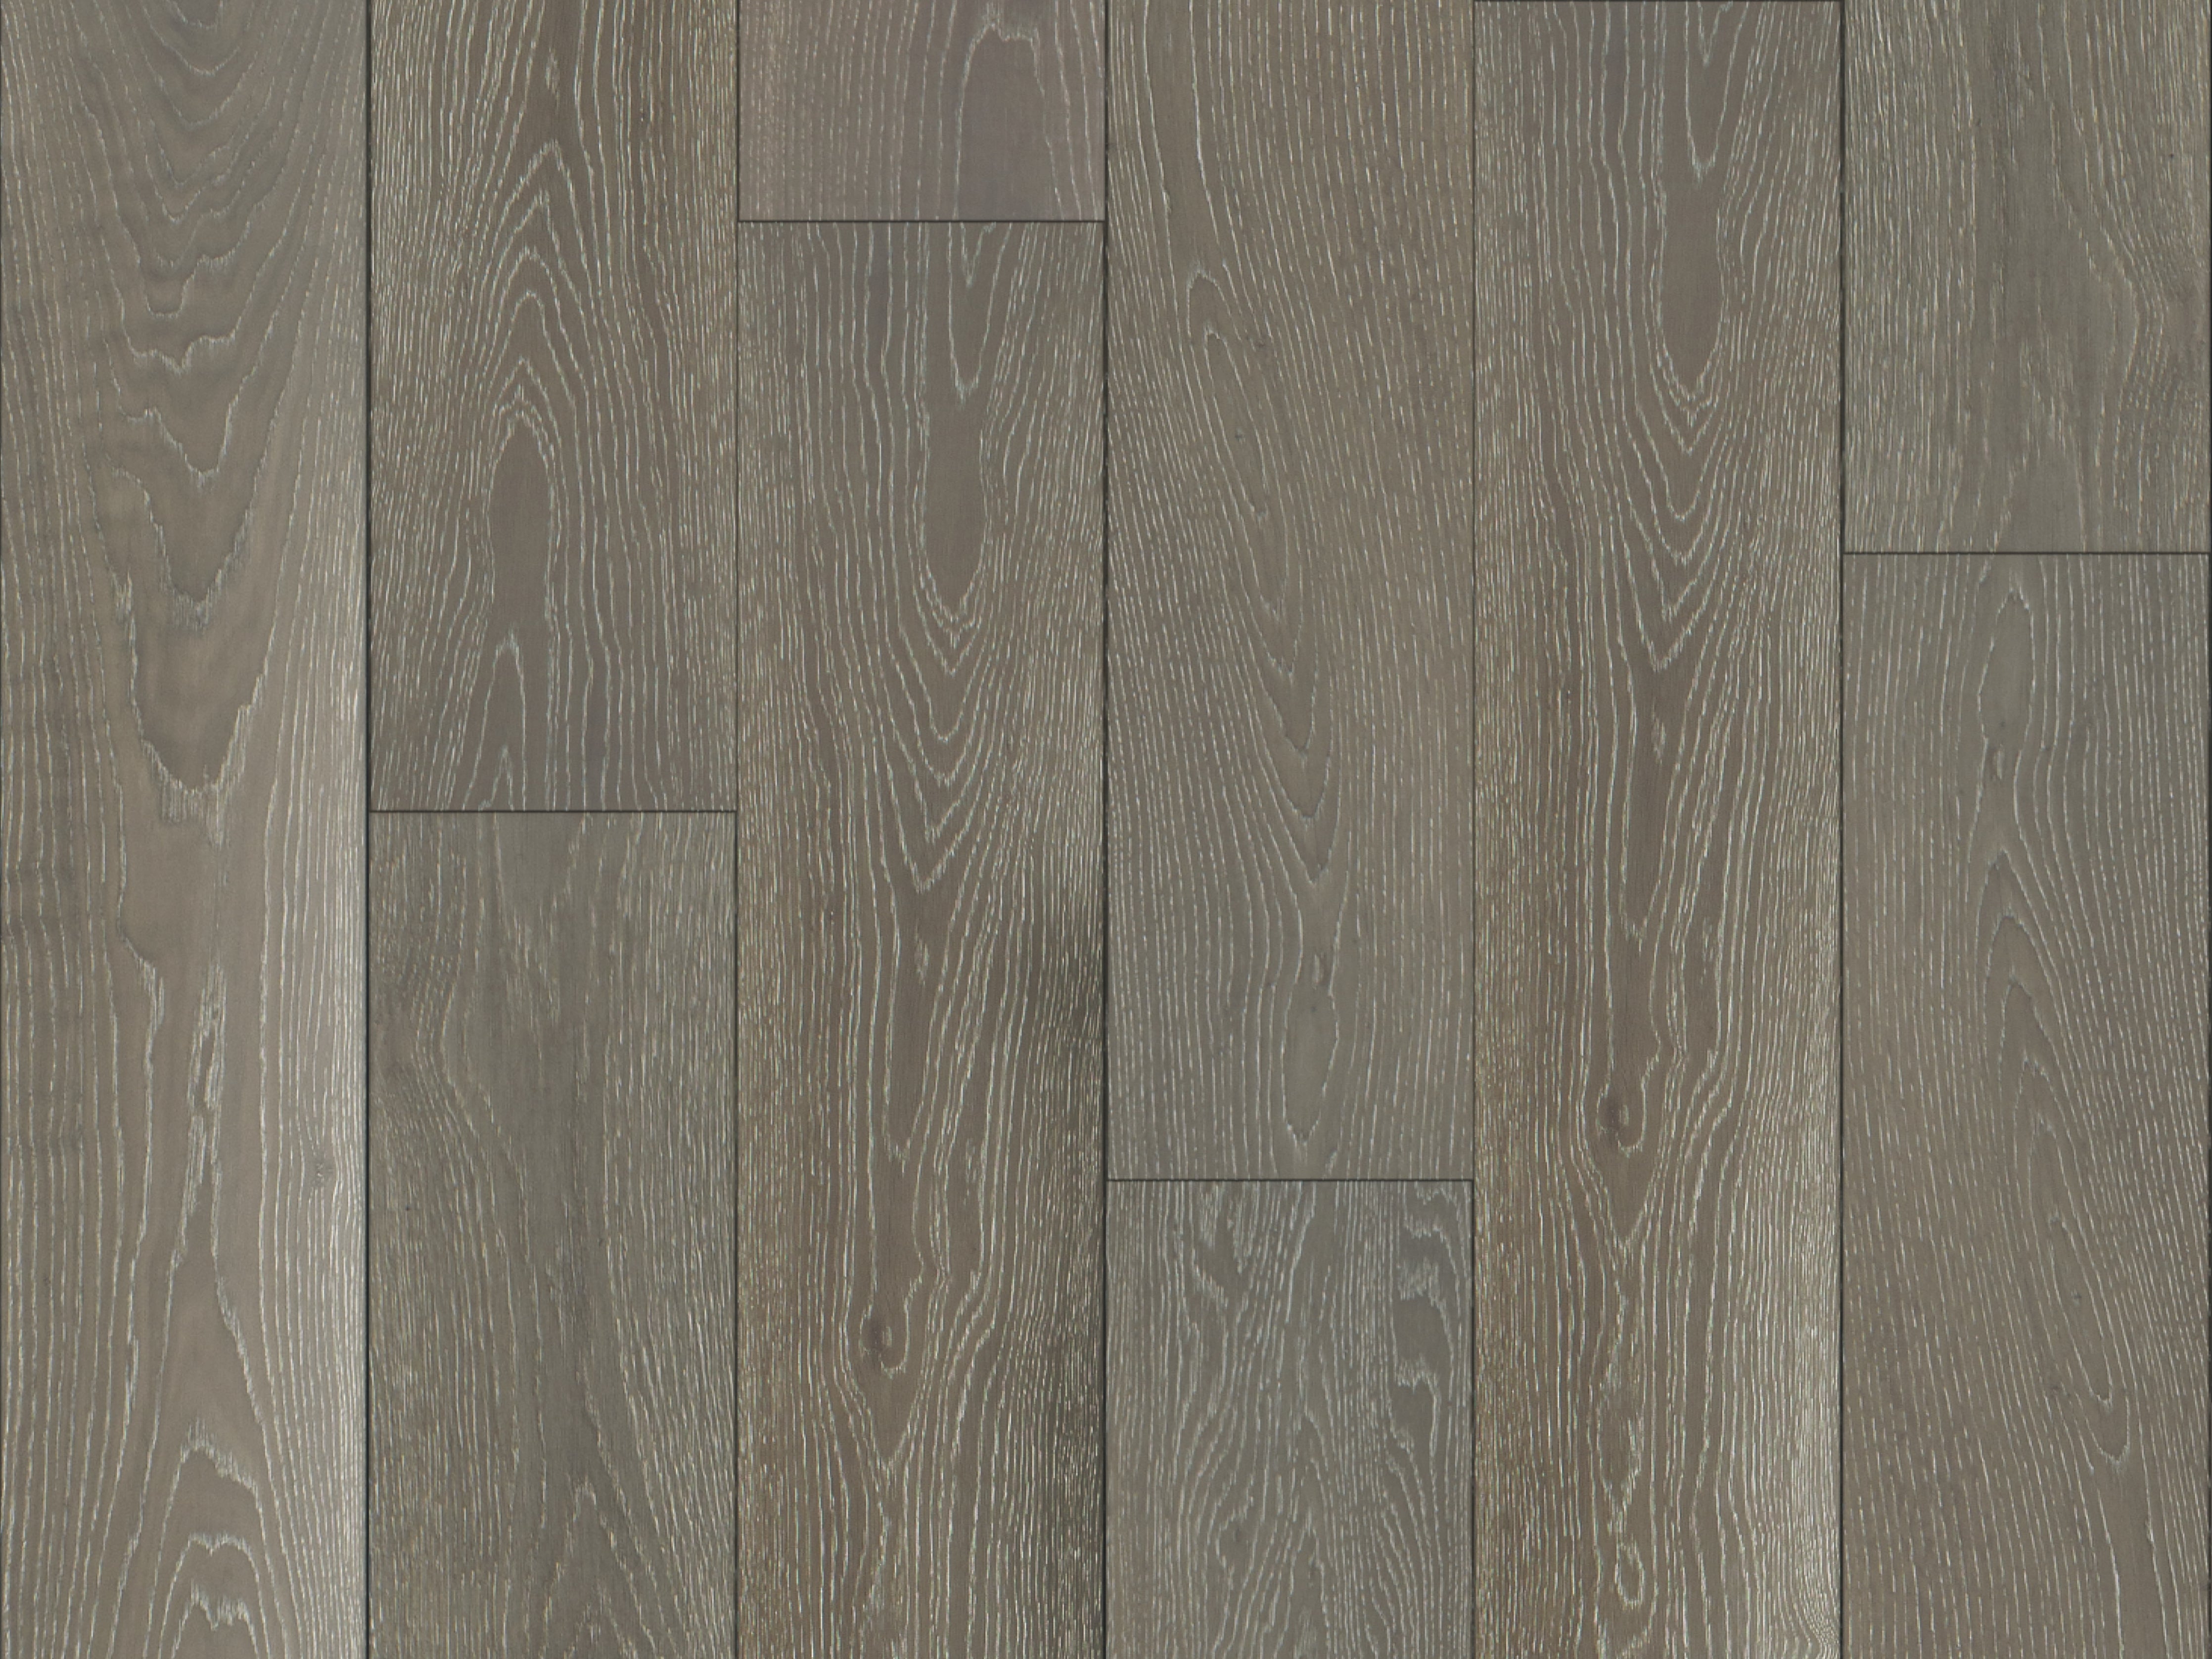 duchateau signature vernal como european oak engineered hardnatural wood floor uv oil finish for interior use distributed by surface group international